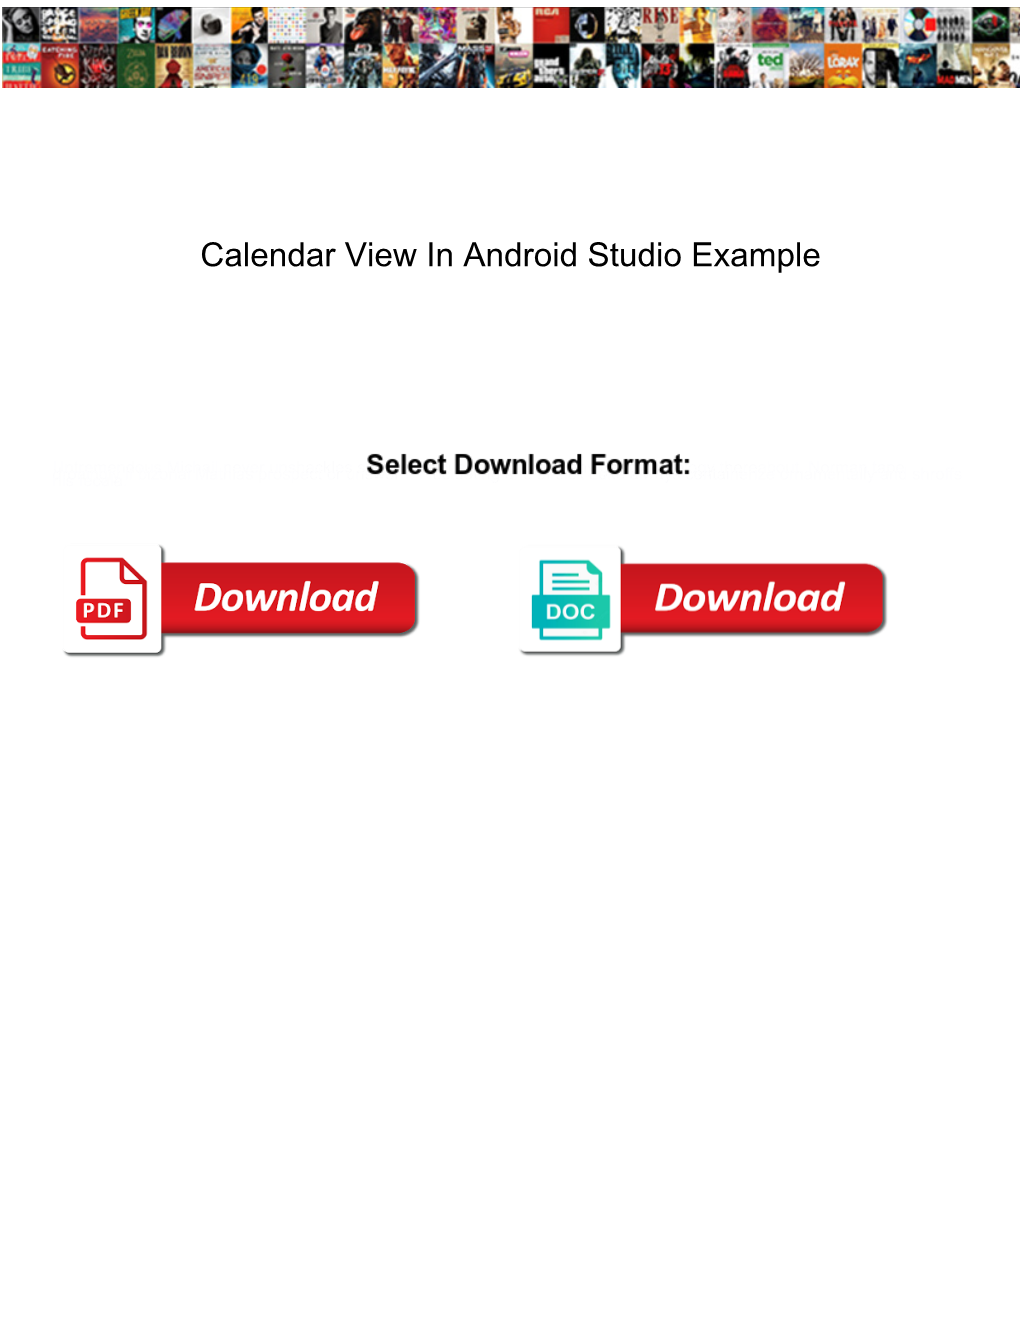 Calendar View in Android Studio Example